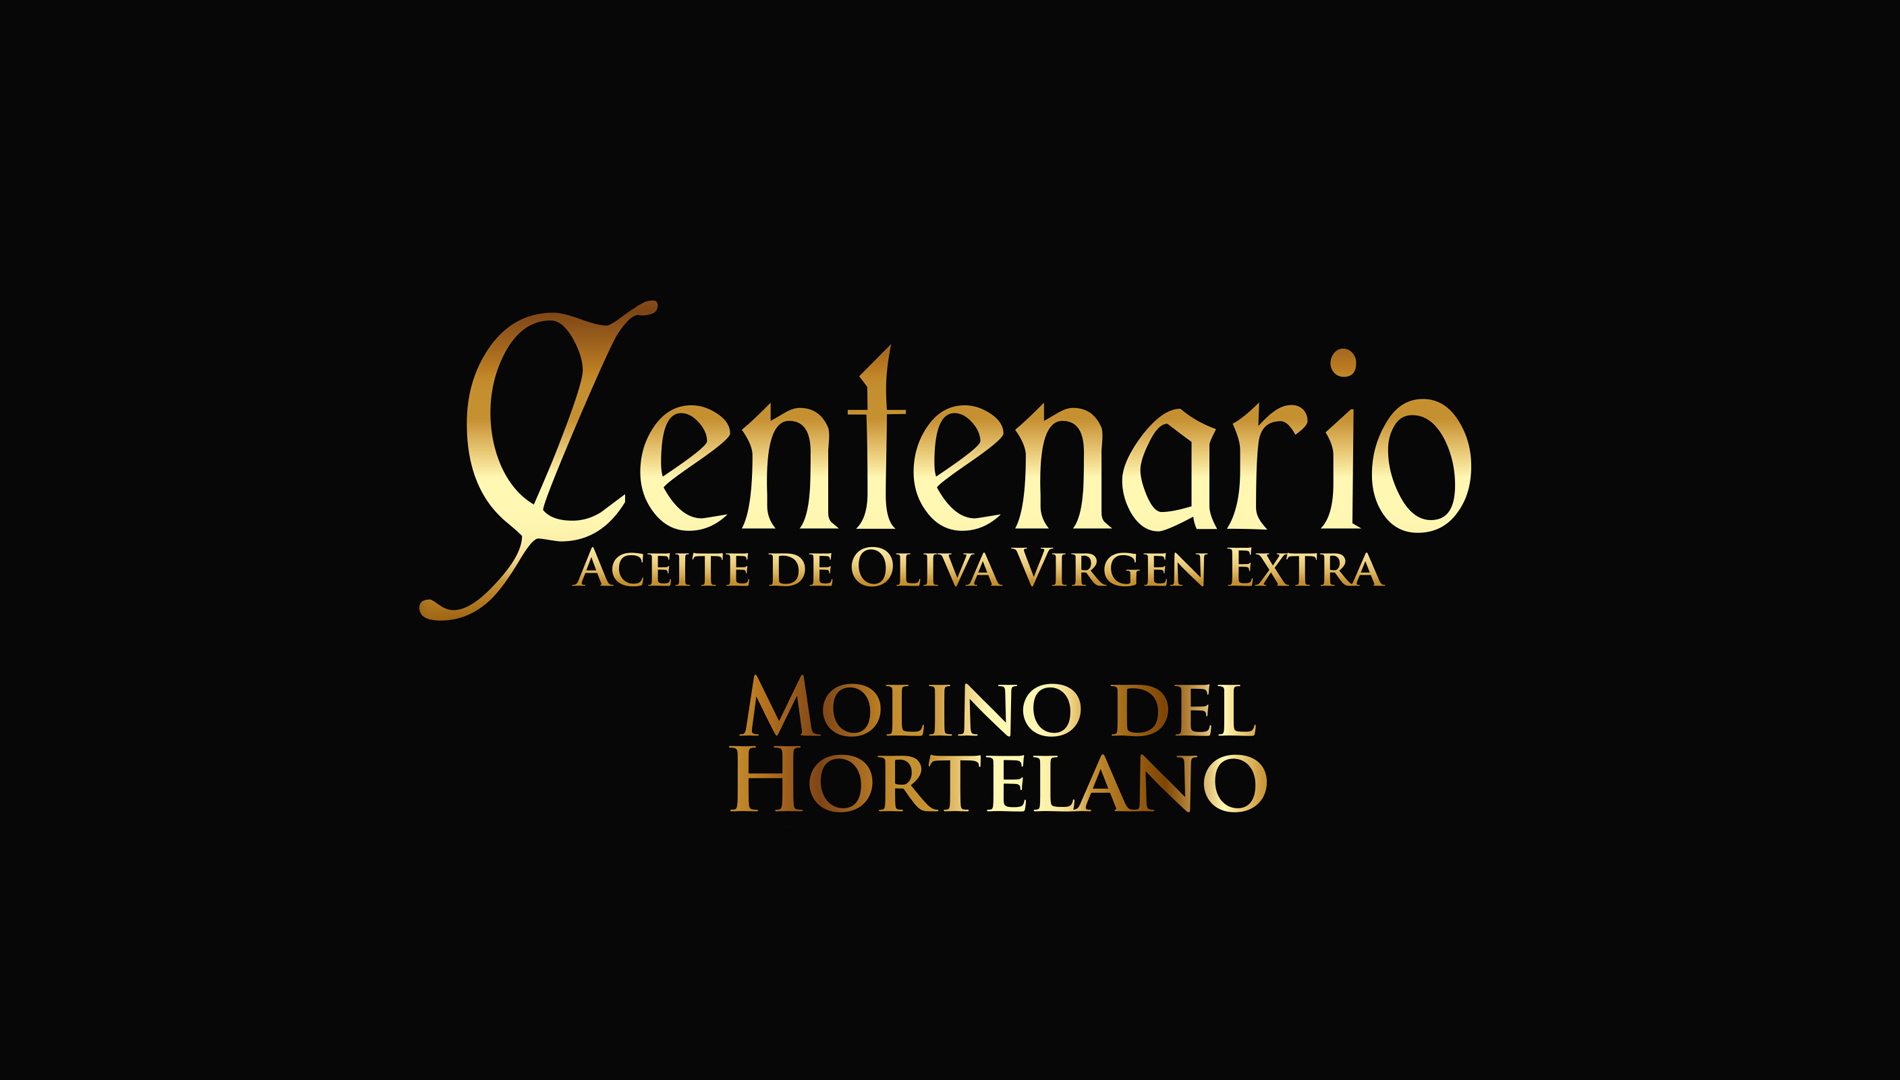 Portfolio of graphic and creative design works of extra virgin olive oil label design and packaging for MOLINO DEL HORTELANO gourmet version limited edition